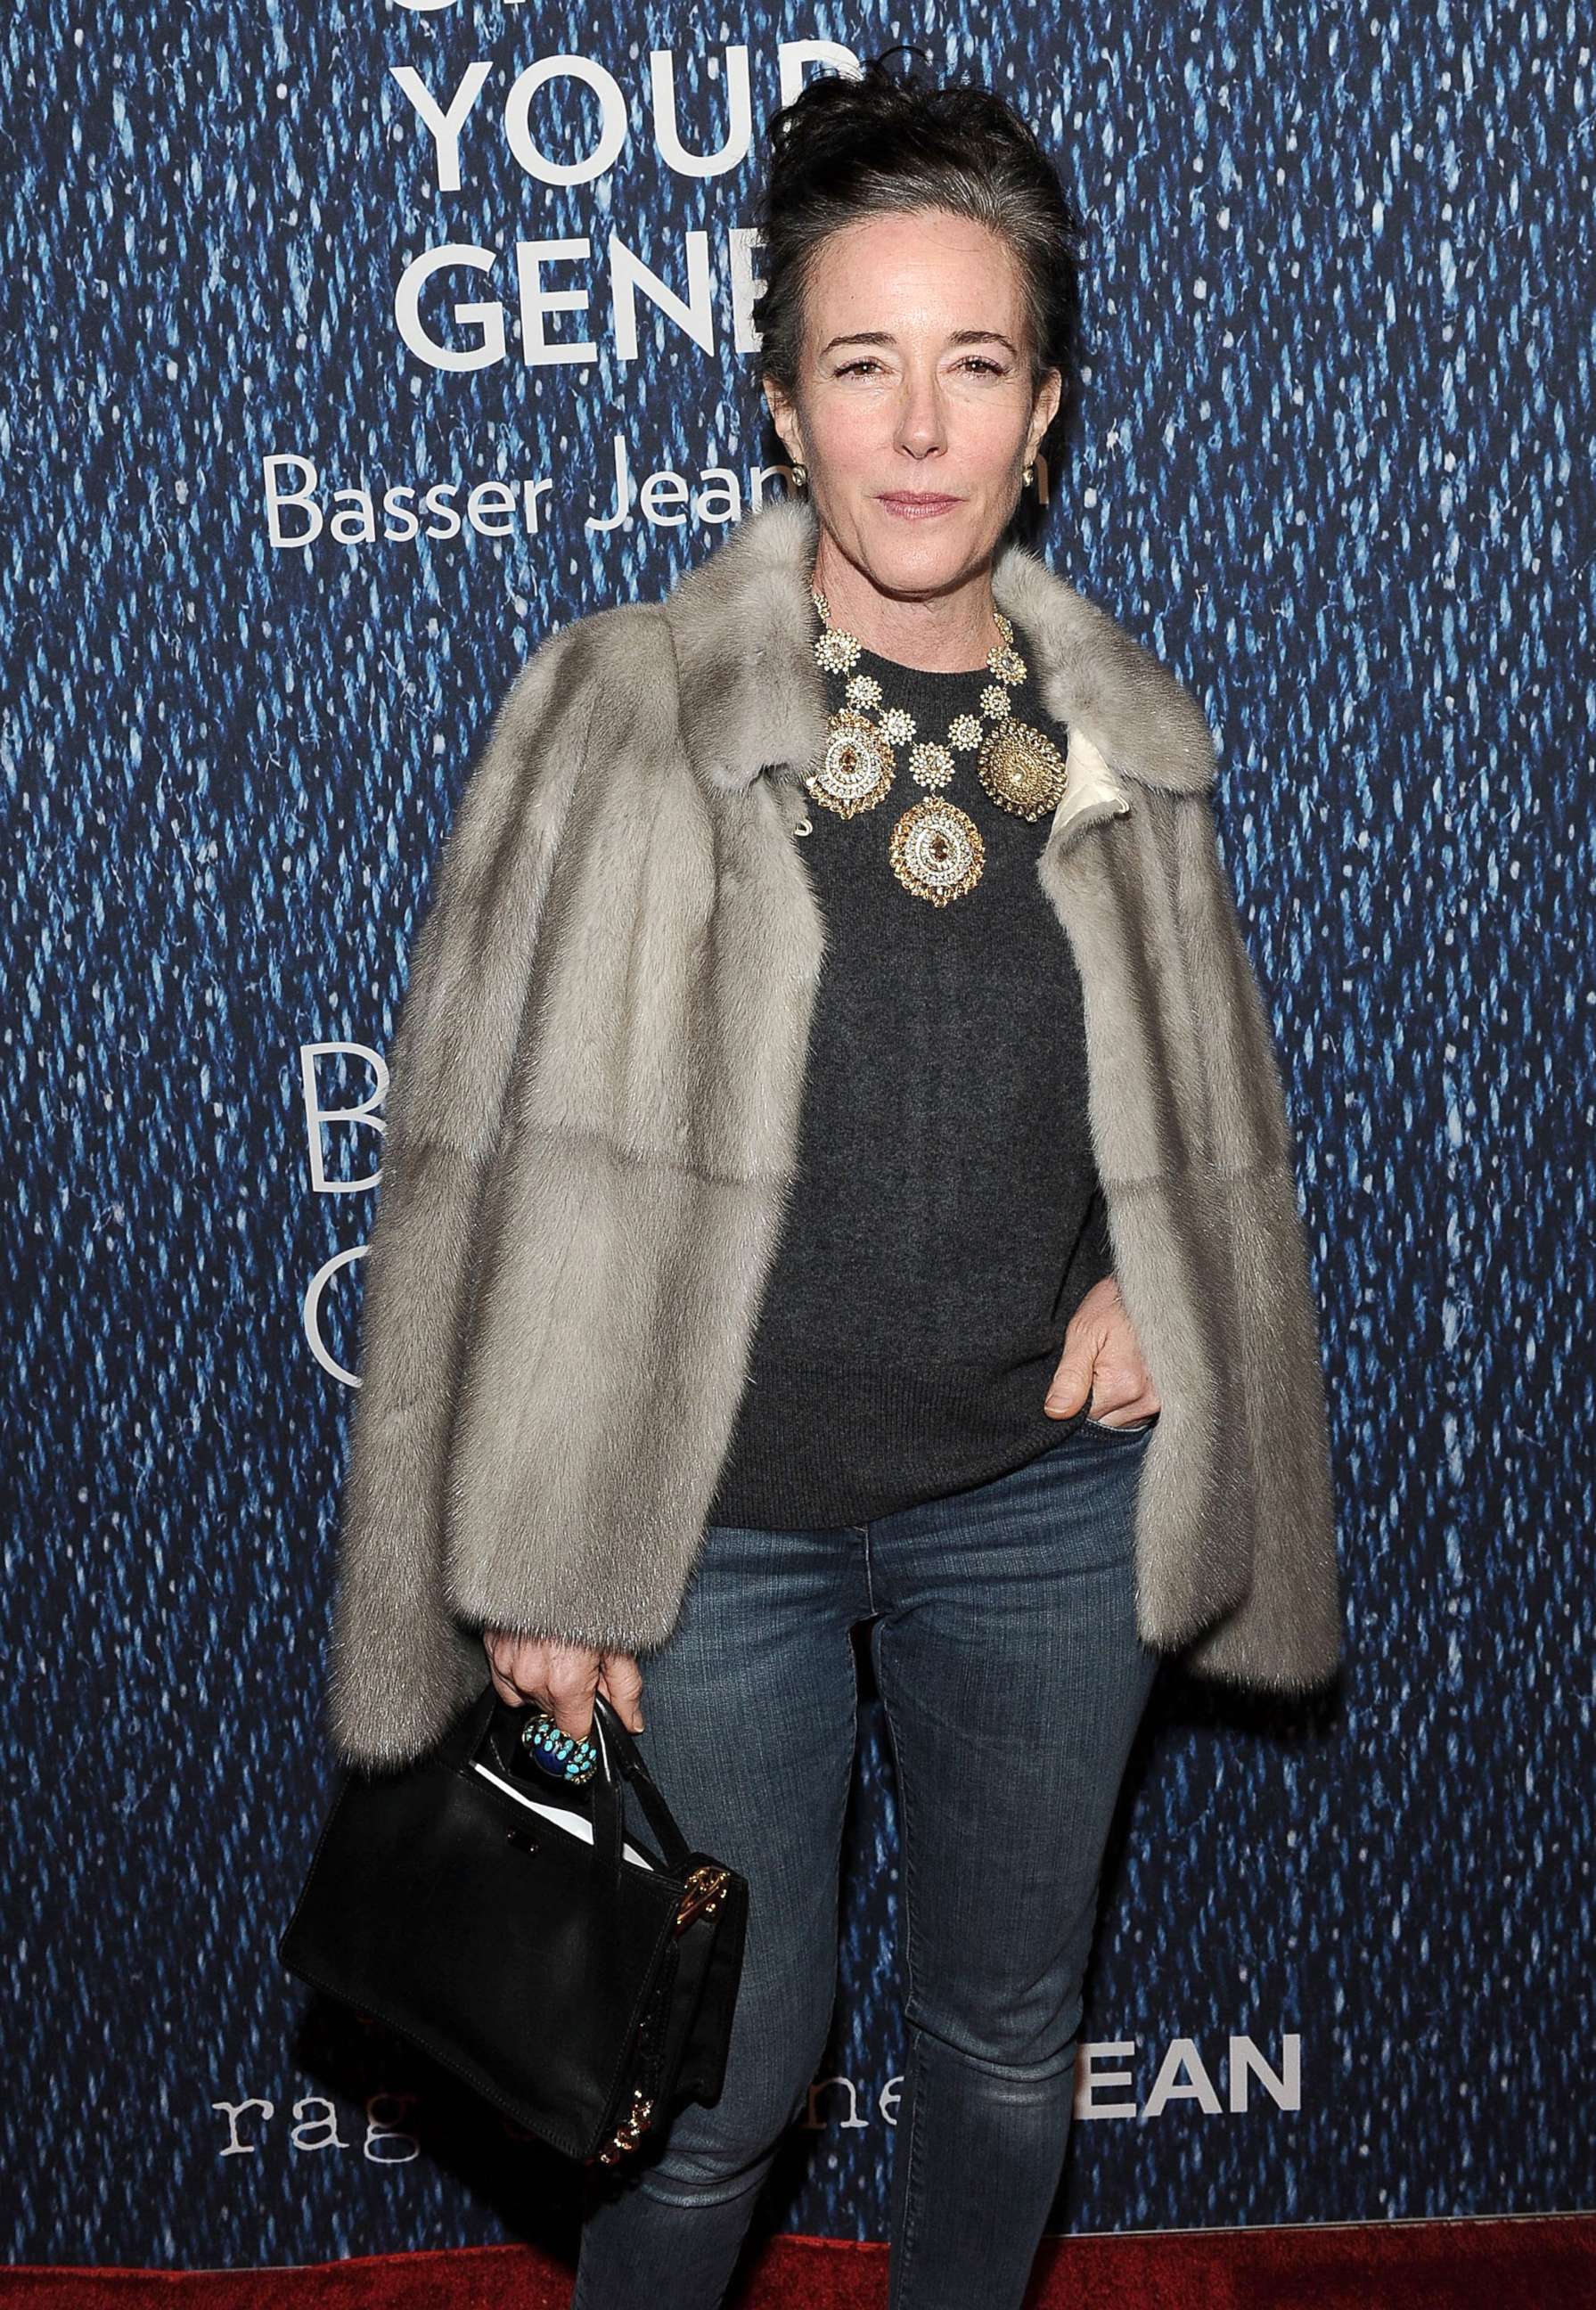 PHOTO: Kate Spade attends the 2015 Basser Center for BRCA benefit at Cipriani Wall Street, Nov. 10, 2015, in New York City.